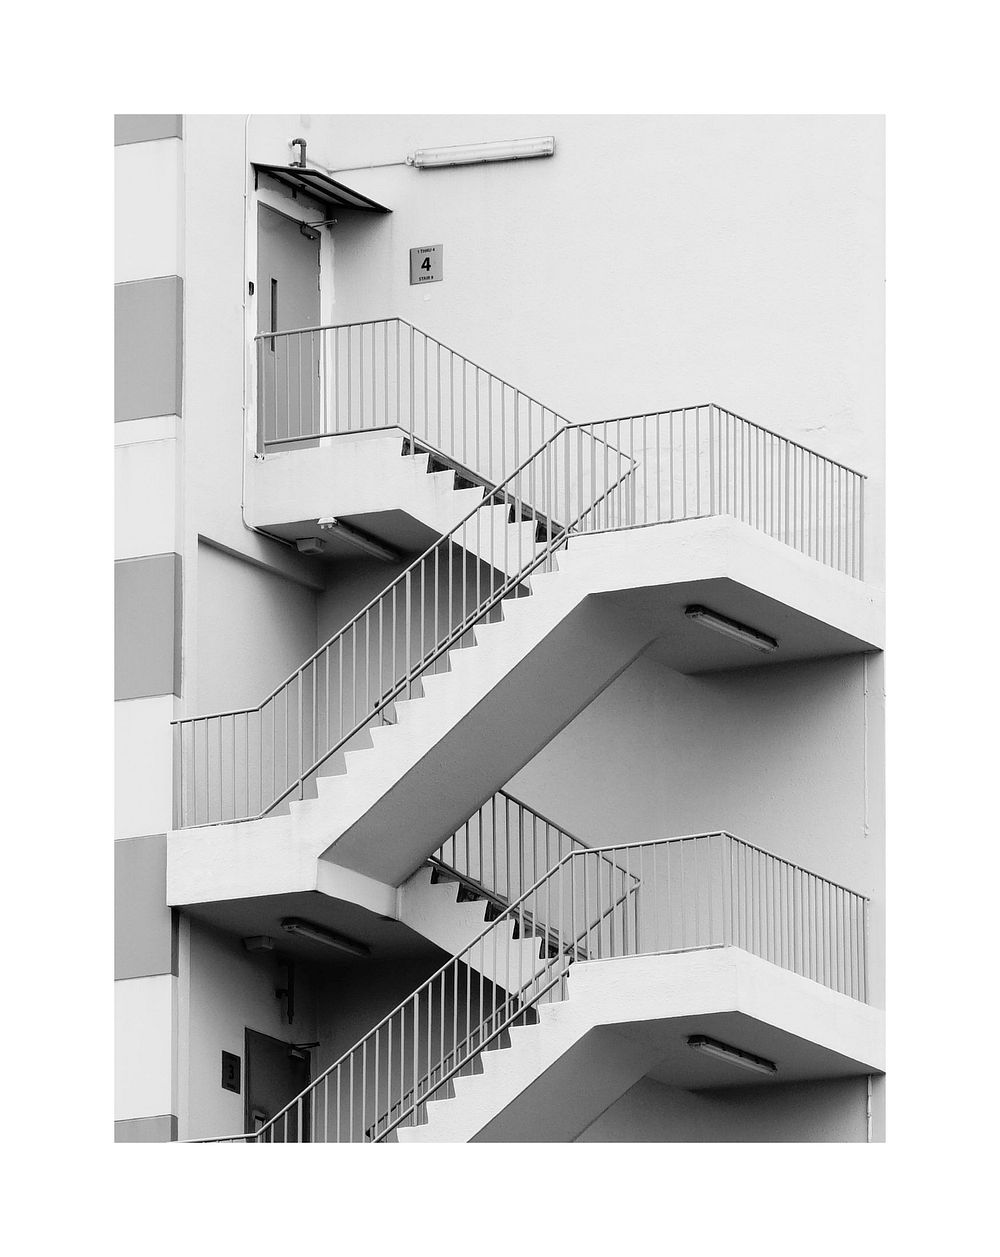 External stairs